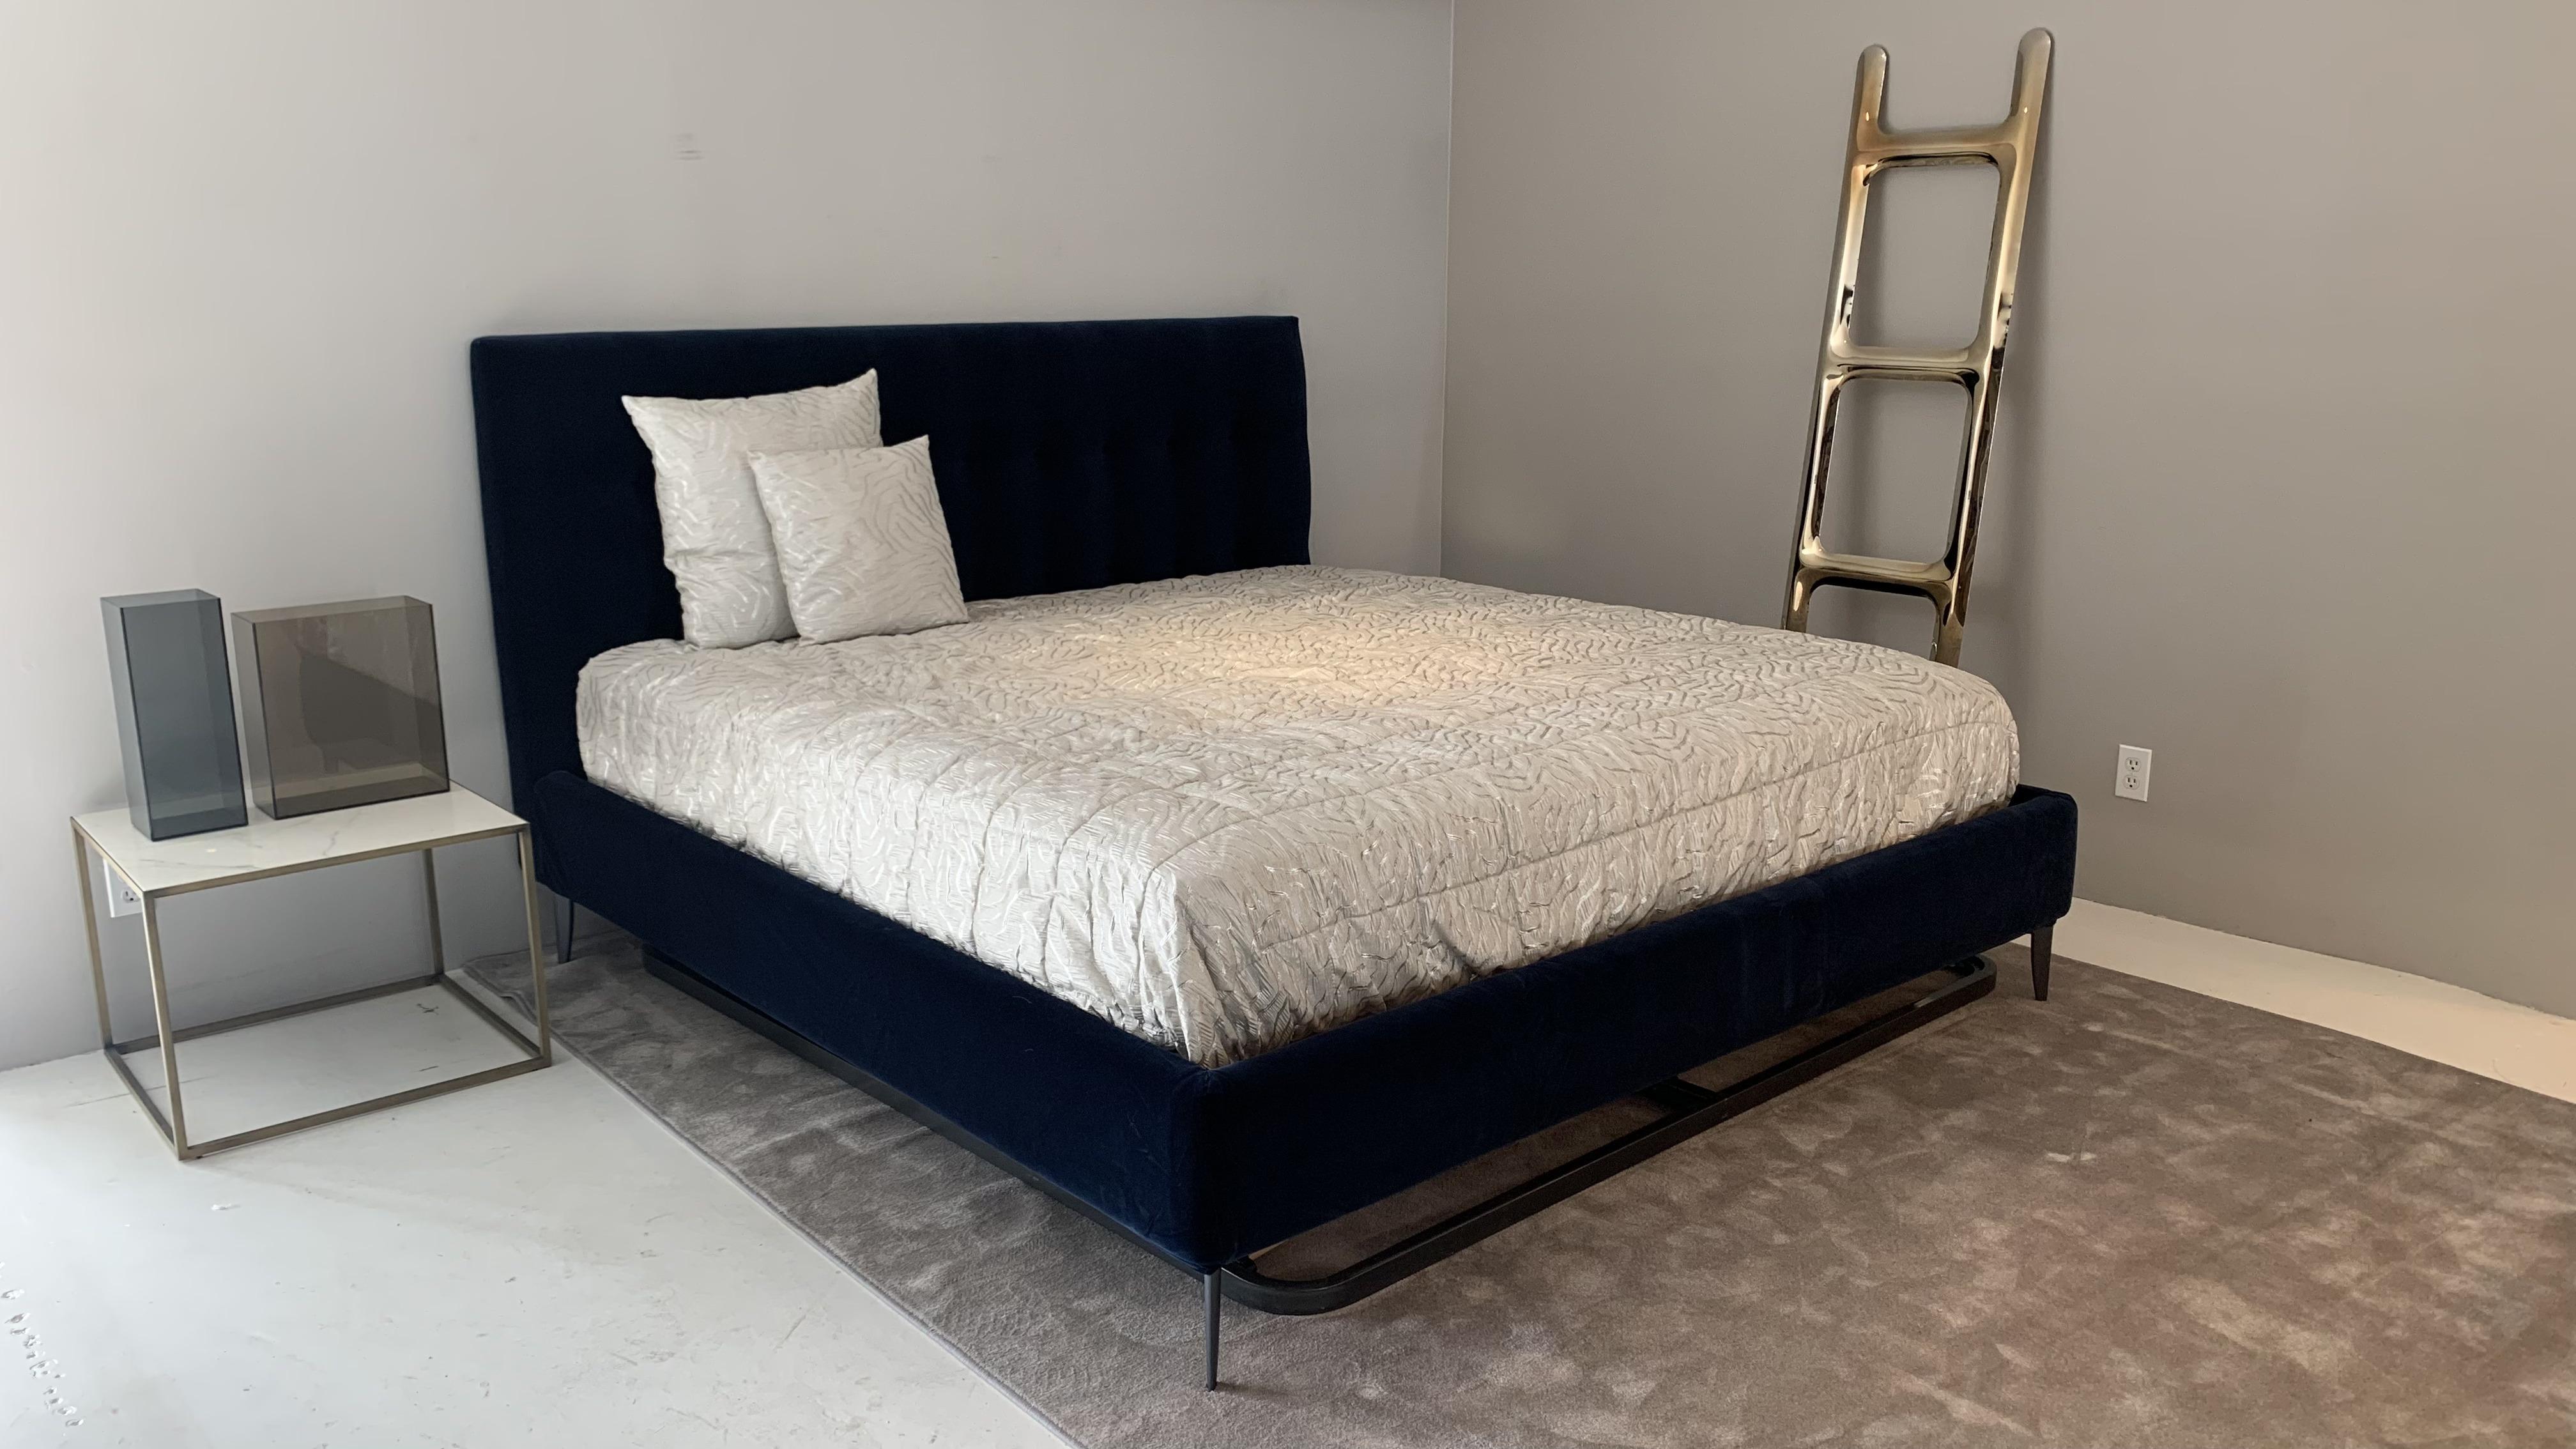 Navy blue Kelly velvet king size bed
(Mattress and pillows not included)

Scroll down and click 